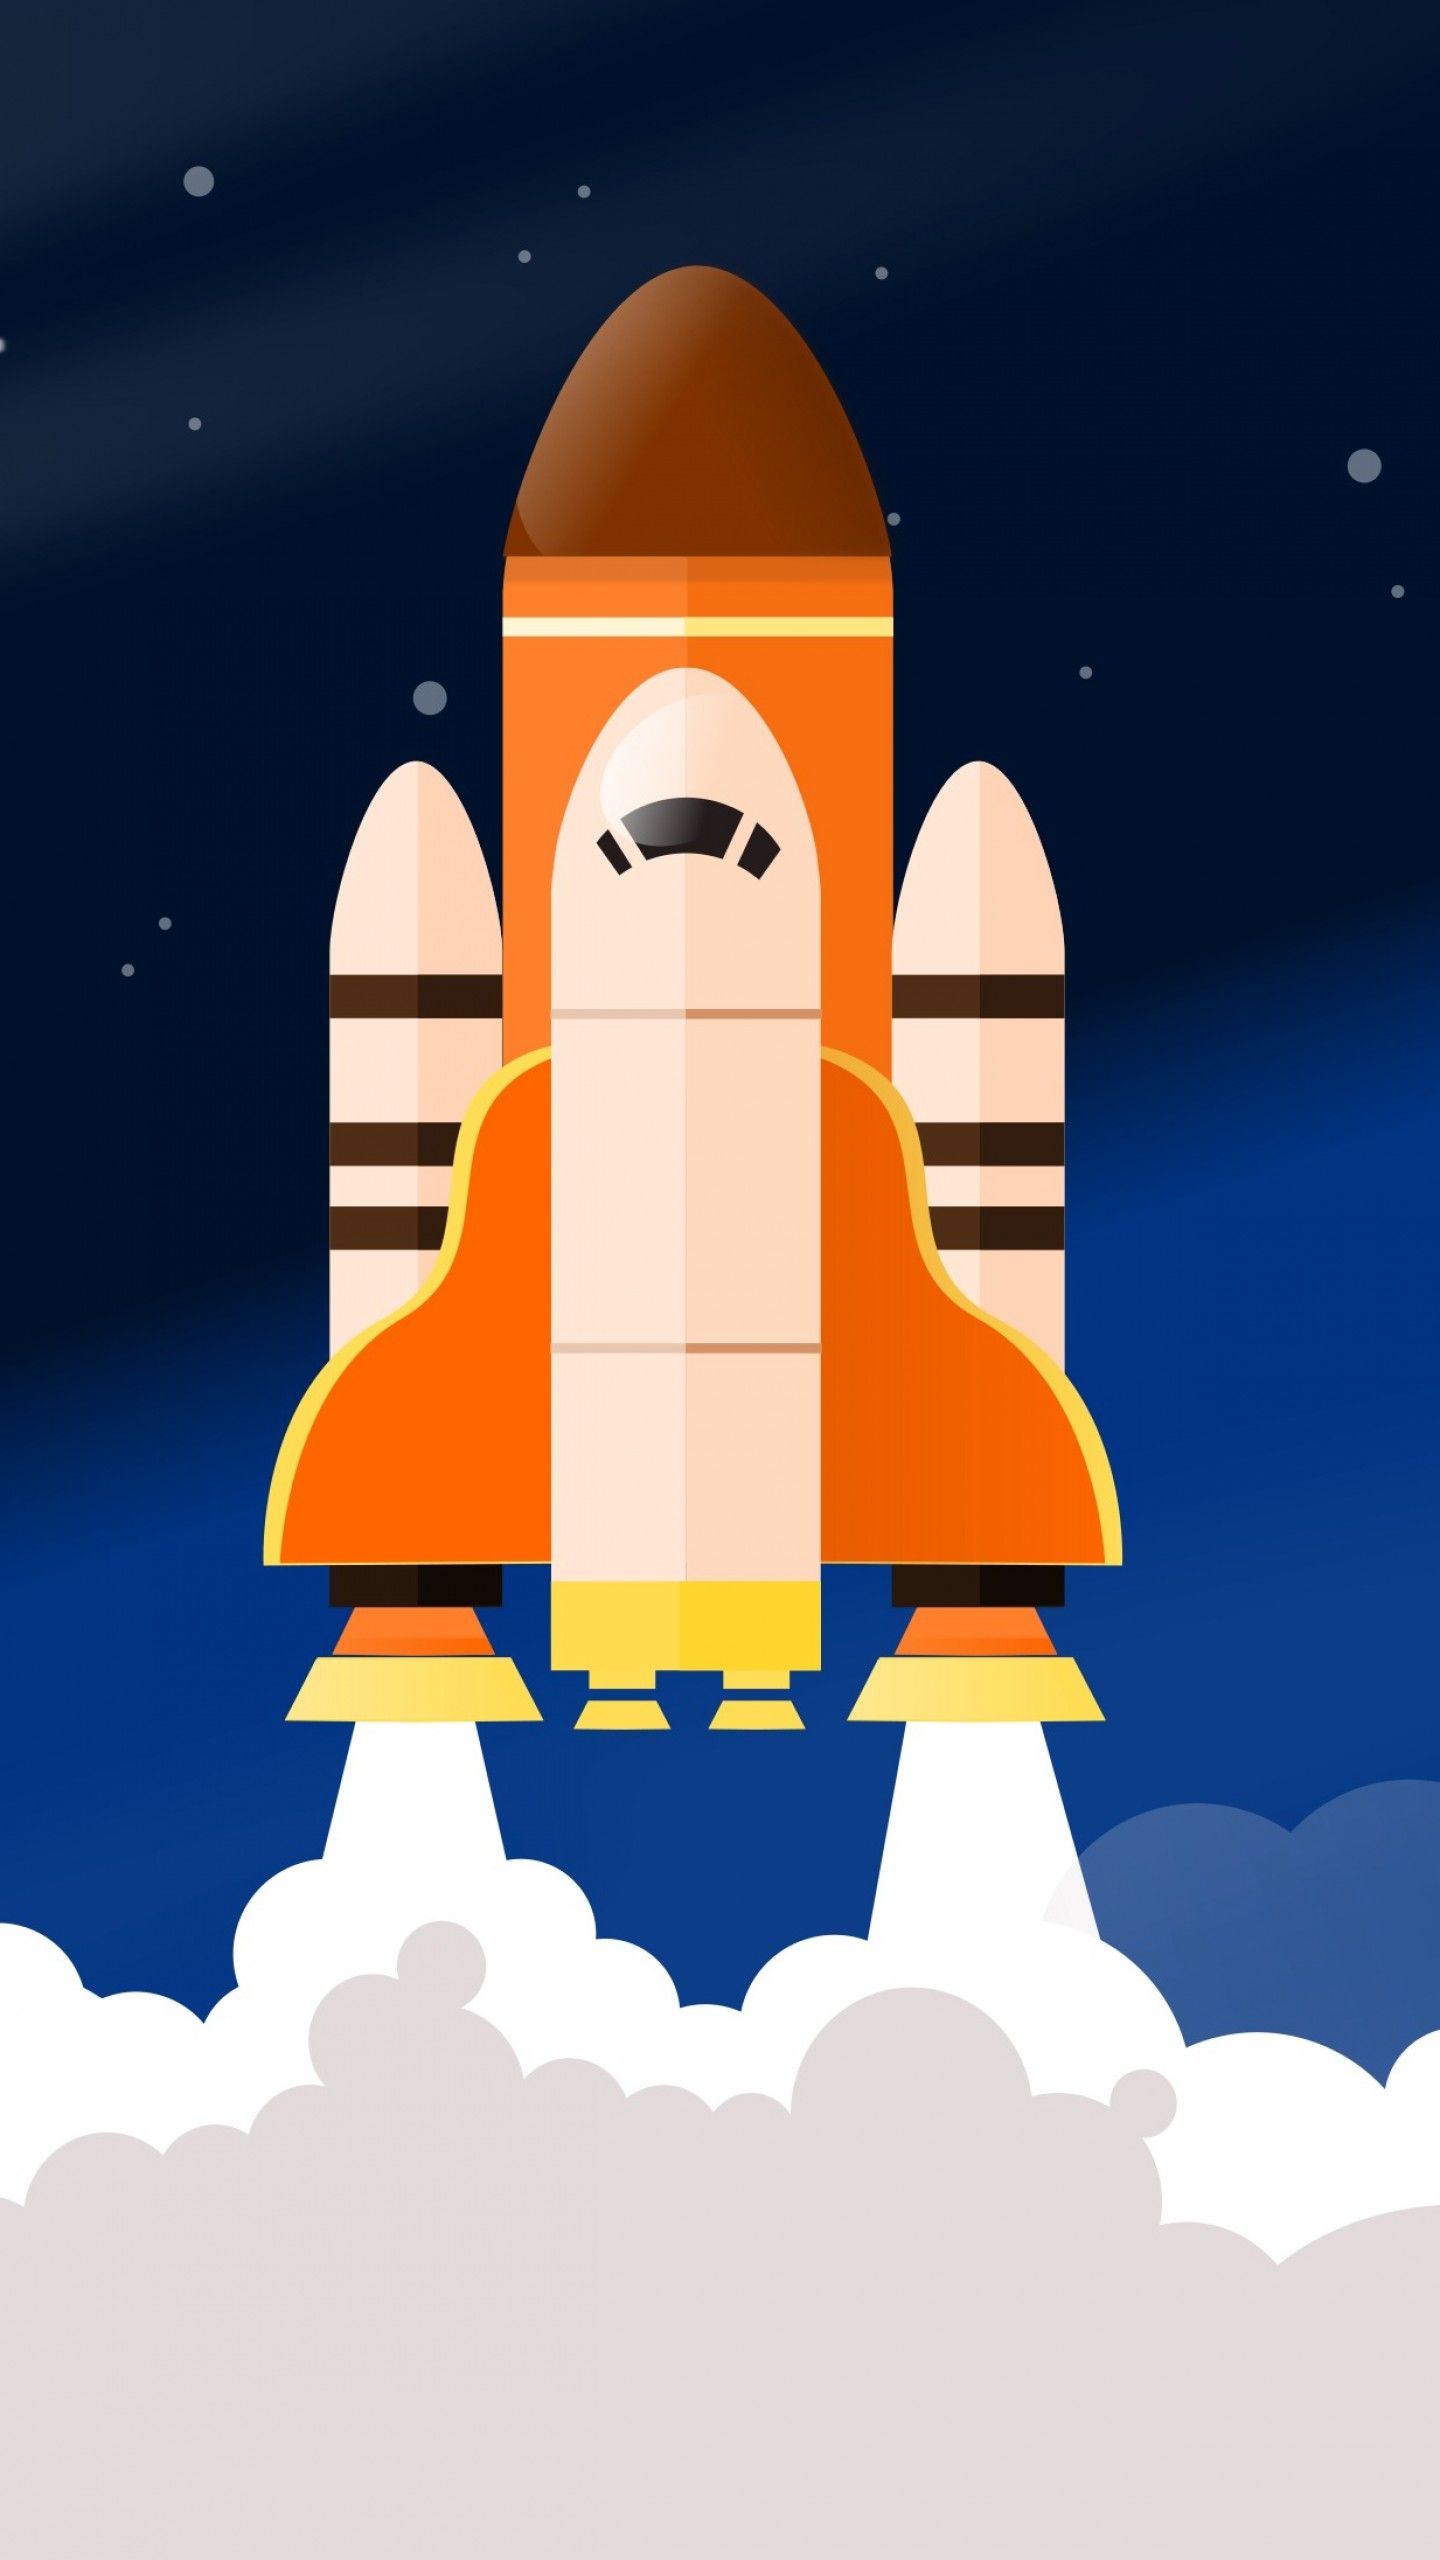 Wallpaper NASA rocket, Rocket boosters, Space launch, HD, Space,. Wallpaper for iPhone, Android, Mobile and Desktop